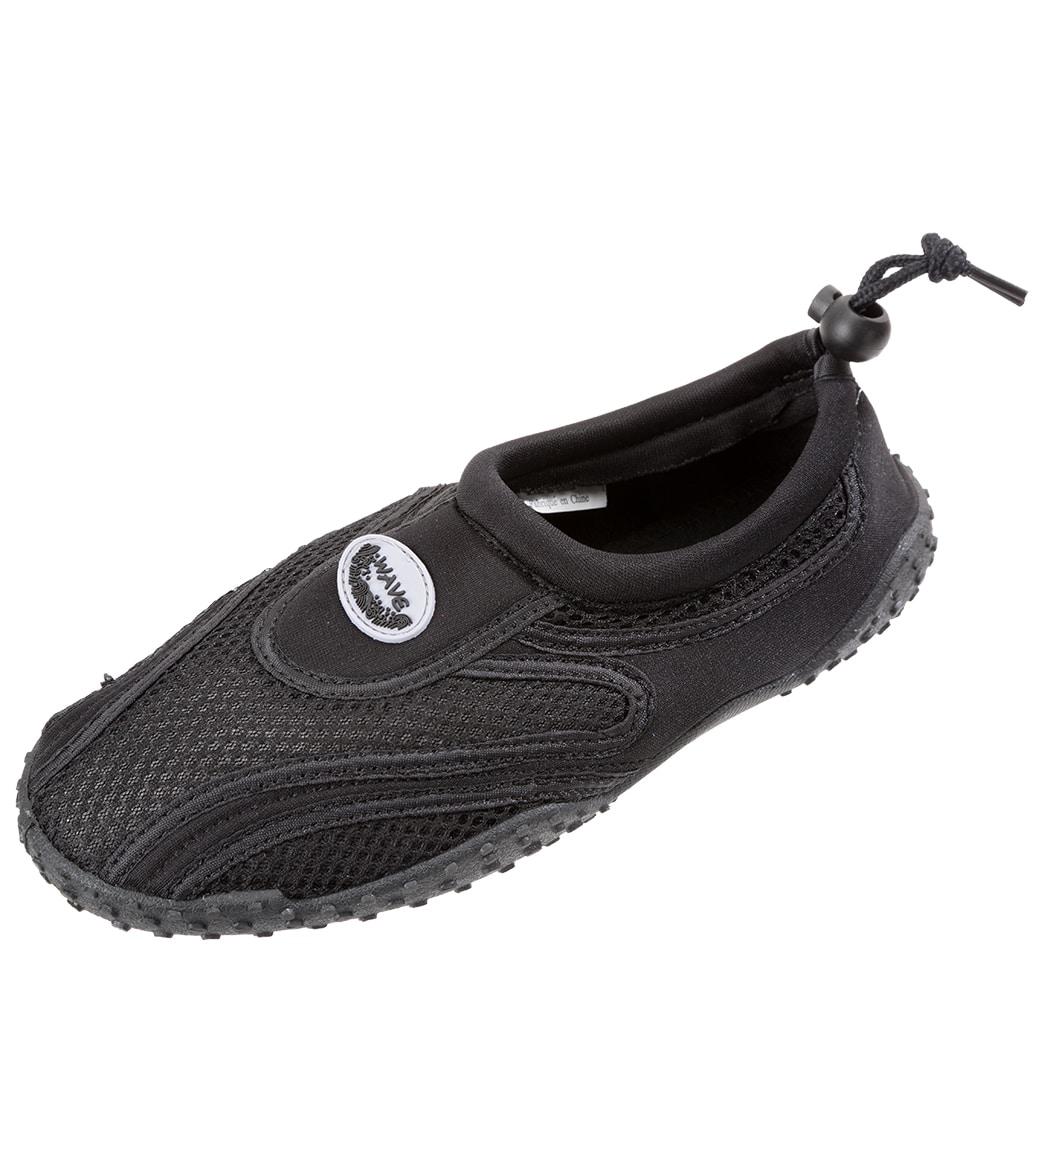 Easy Usa Black Women's Water Shoes - 6 - Swimoutlet.com